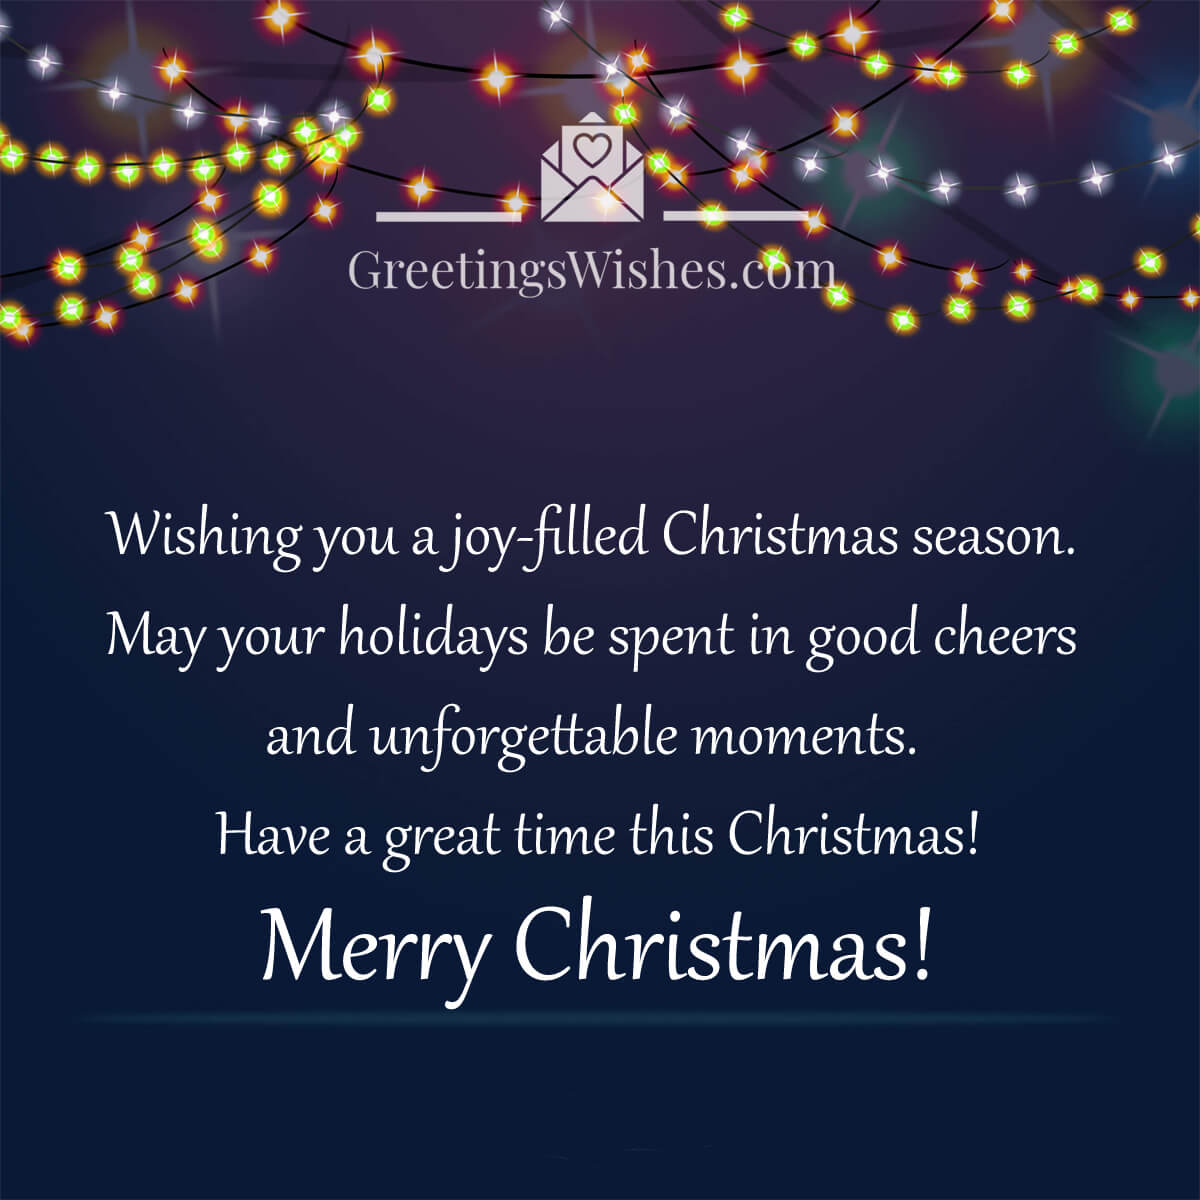 Merry Christmas Greetings (25th December) - Greetings Wishes